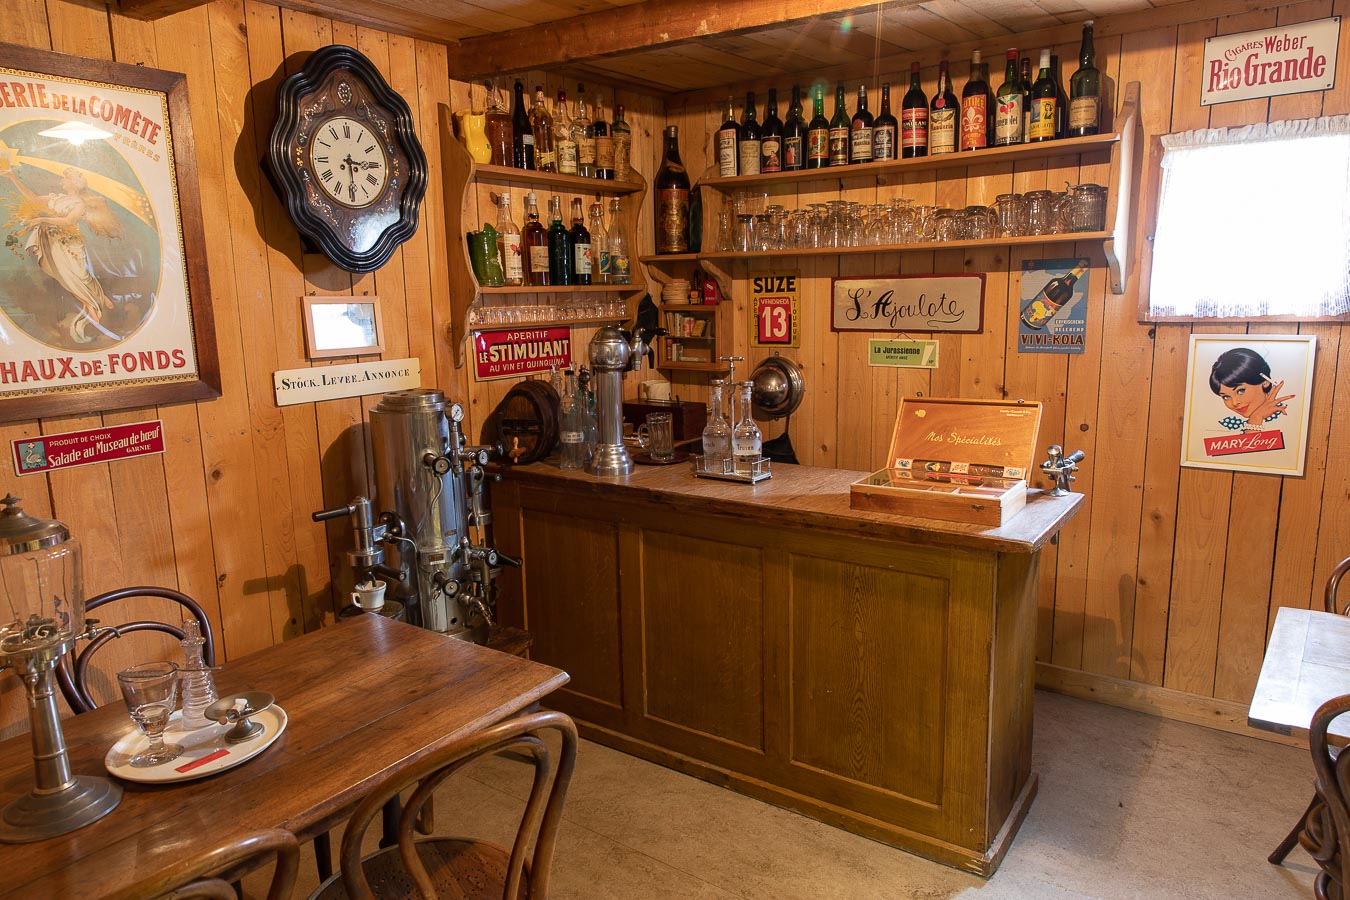 A classic bar shed with antique furniture